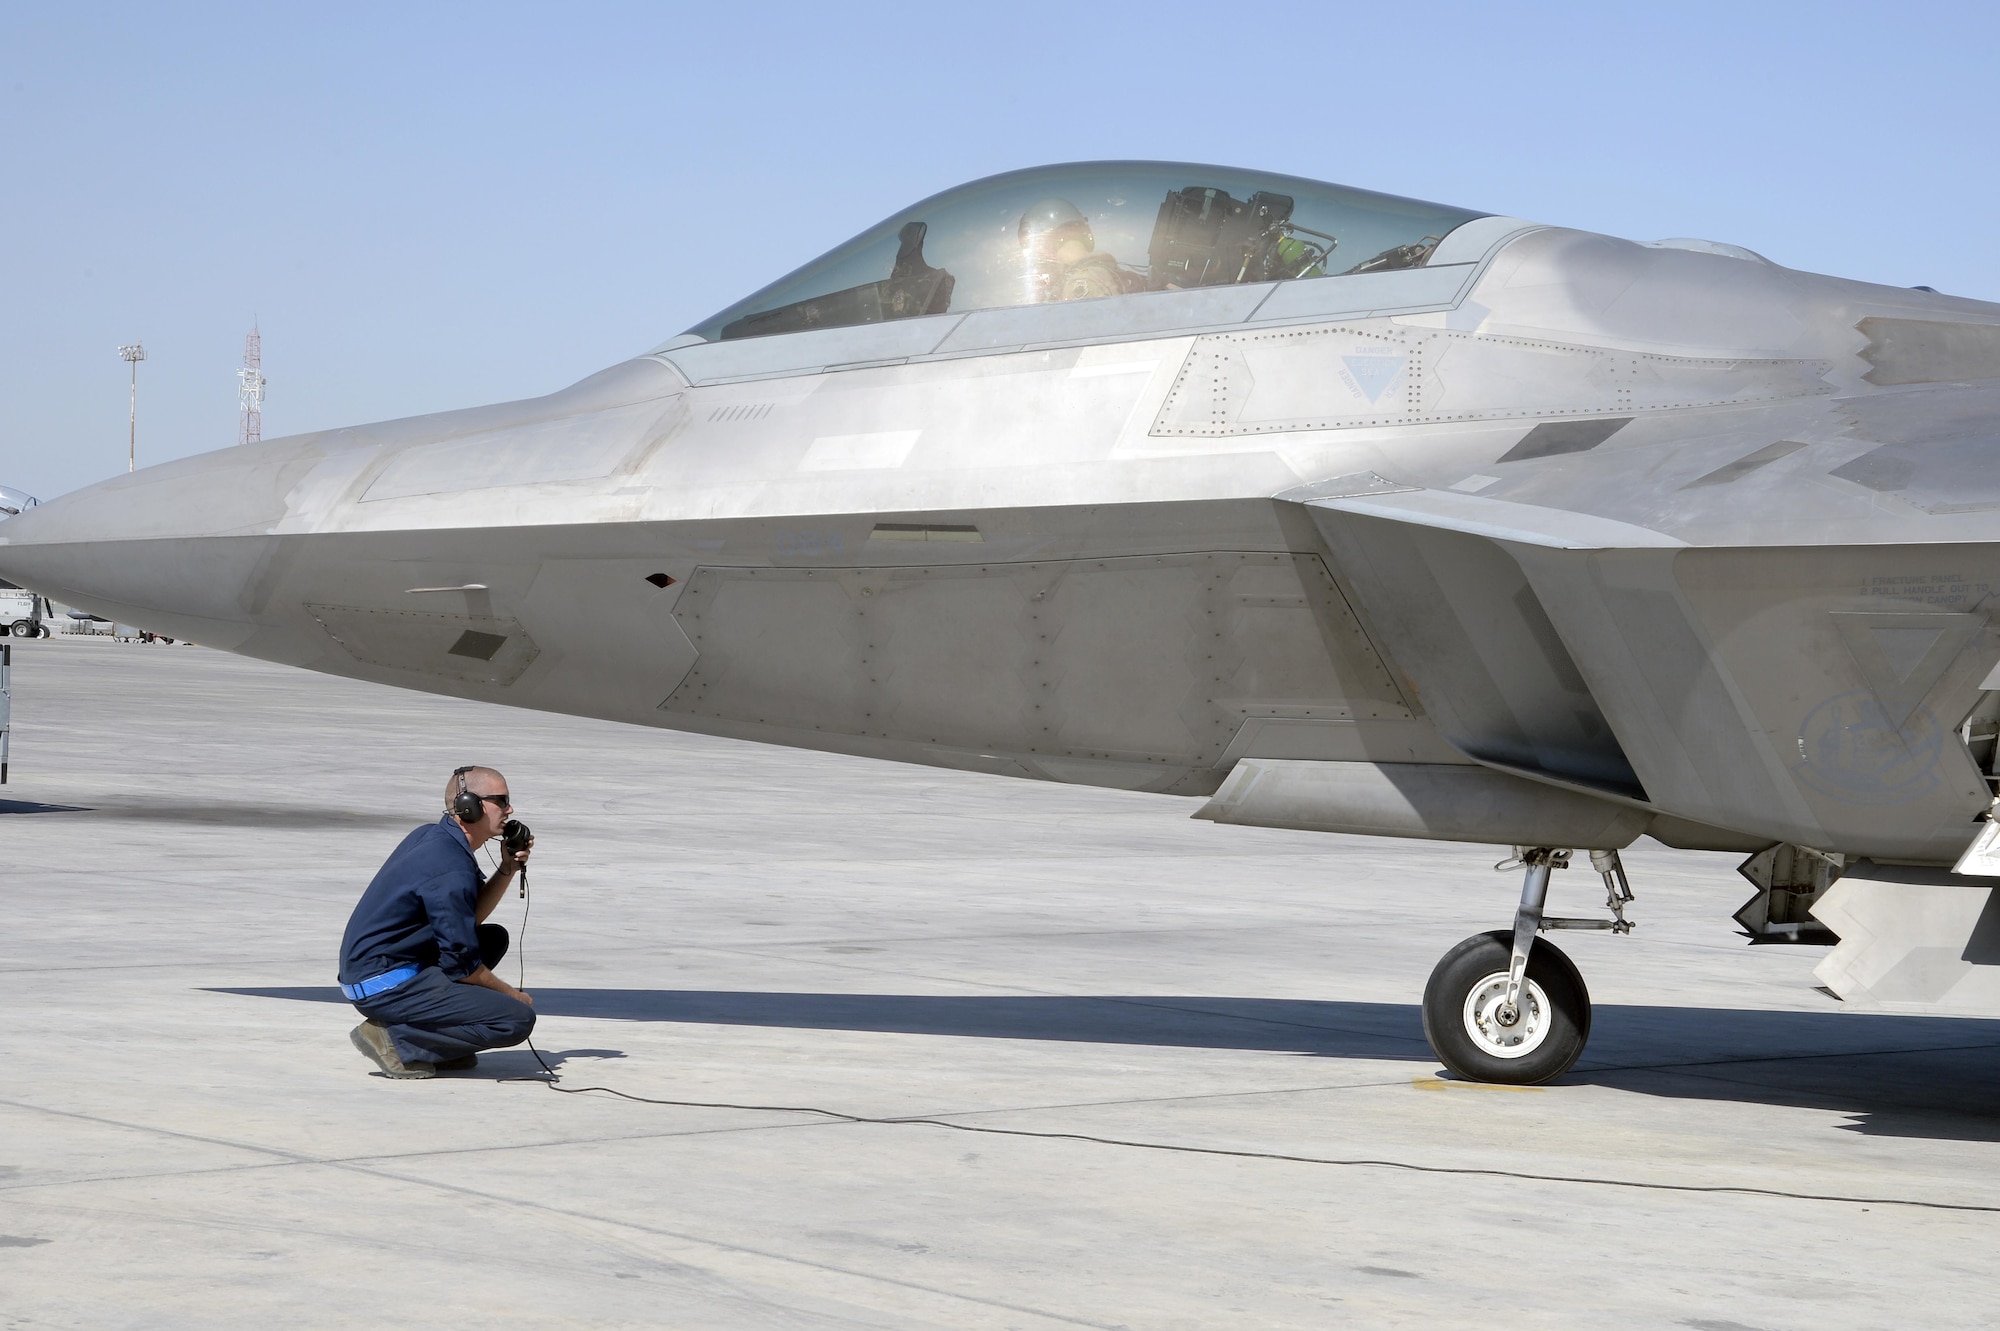 Senior Airman Benjamin, crew chief, kneels by an F-22 Raptor prior to take-off at an undisclosed location in Southwest Asia Jan. 26, 2015. Airmen with the Raptor AMU work around the clock ensuring the F-22 Raptor provides lethal and decisive airpower wherever and whenever needed. Benjamin is currently deployed from Tyndall Air Force Base, Fla., is a native of Hazel Green, Alabama. (U.S. Air Force/Tech. Sgt. Marie Brown)